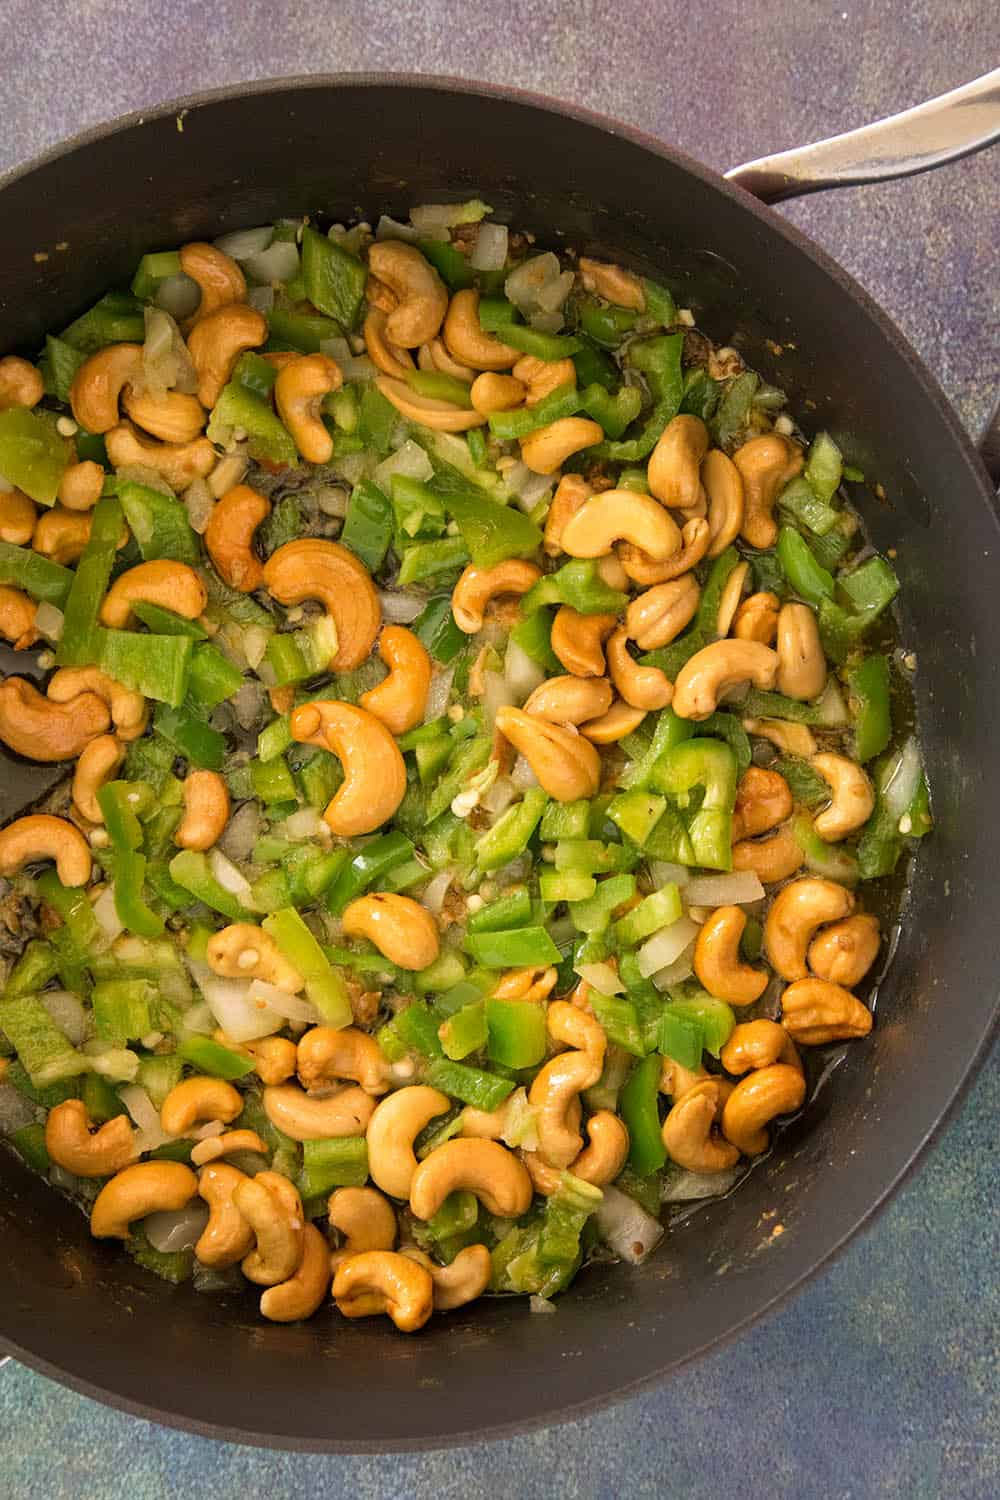 Cooking down the onions, peppers and cashew nuts